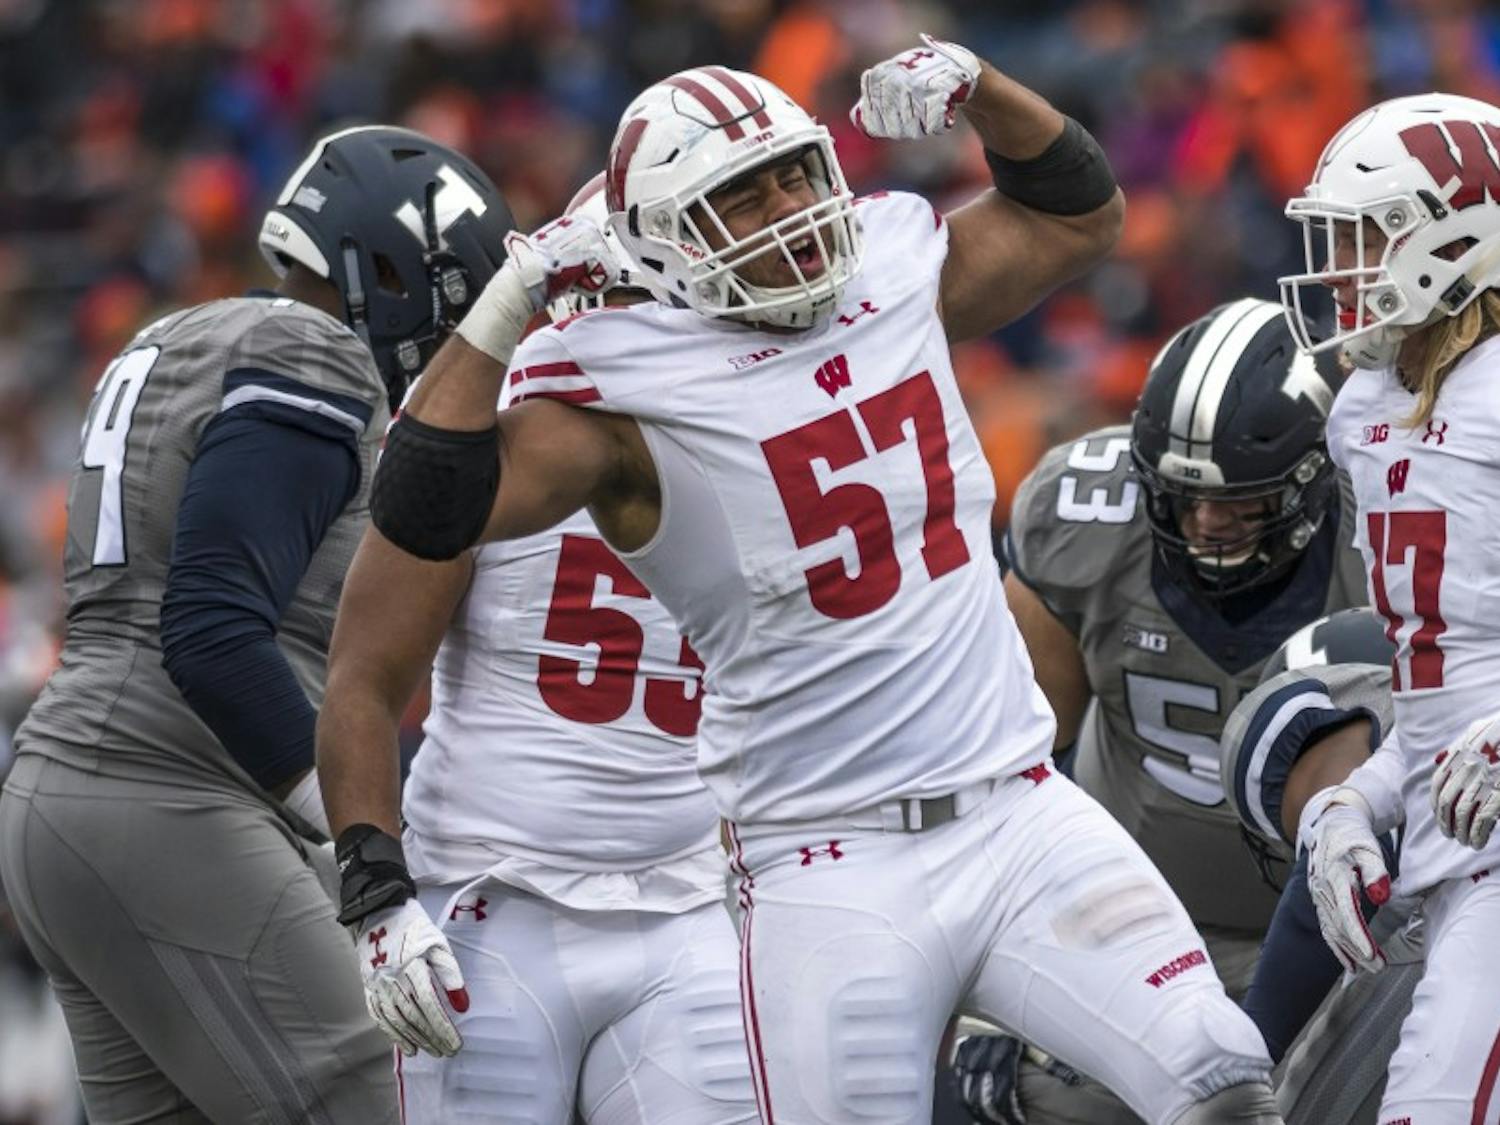 Gallery: Wisconsin remains undefeated with 24-10 win over Illinois